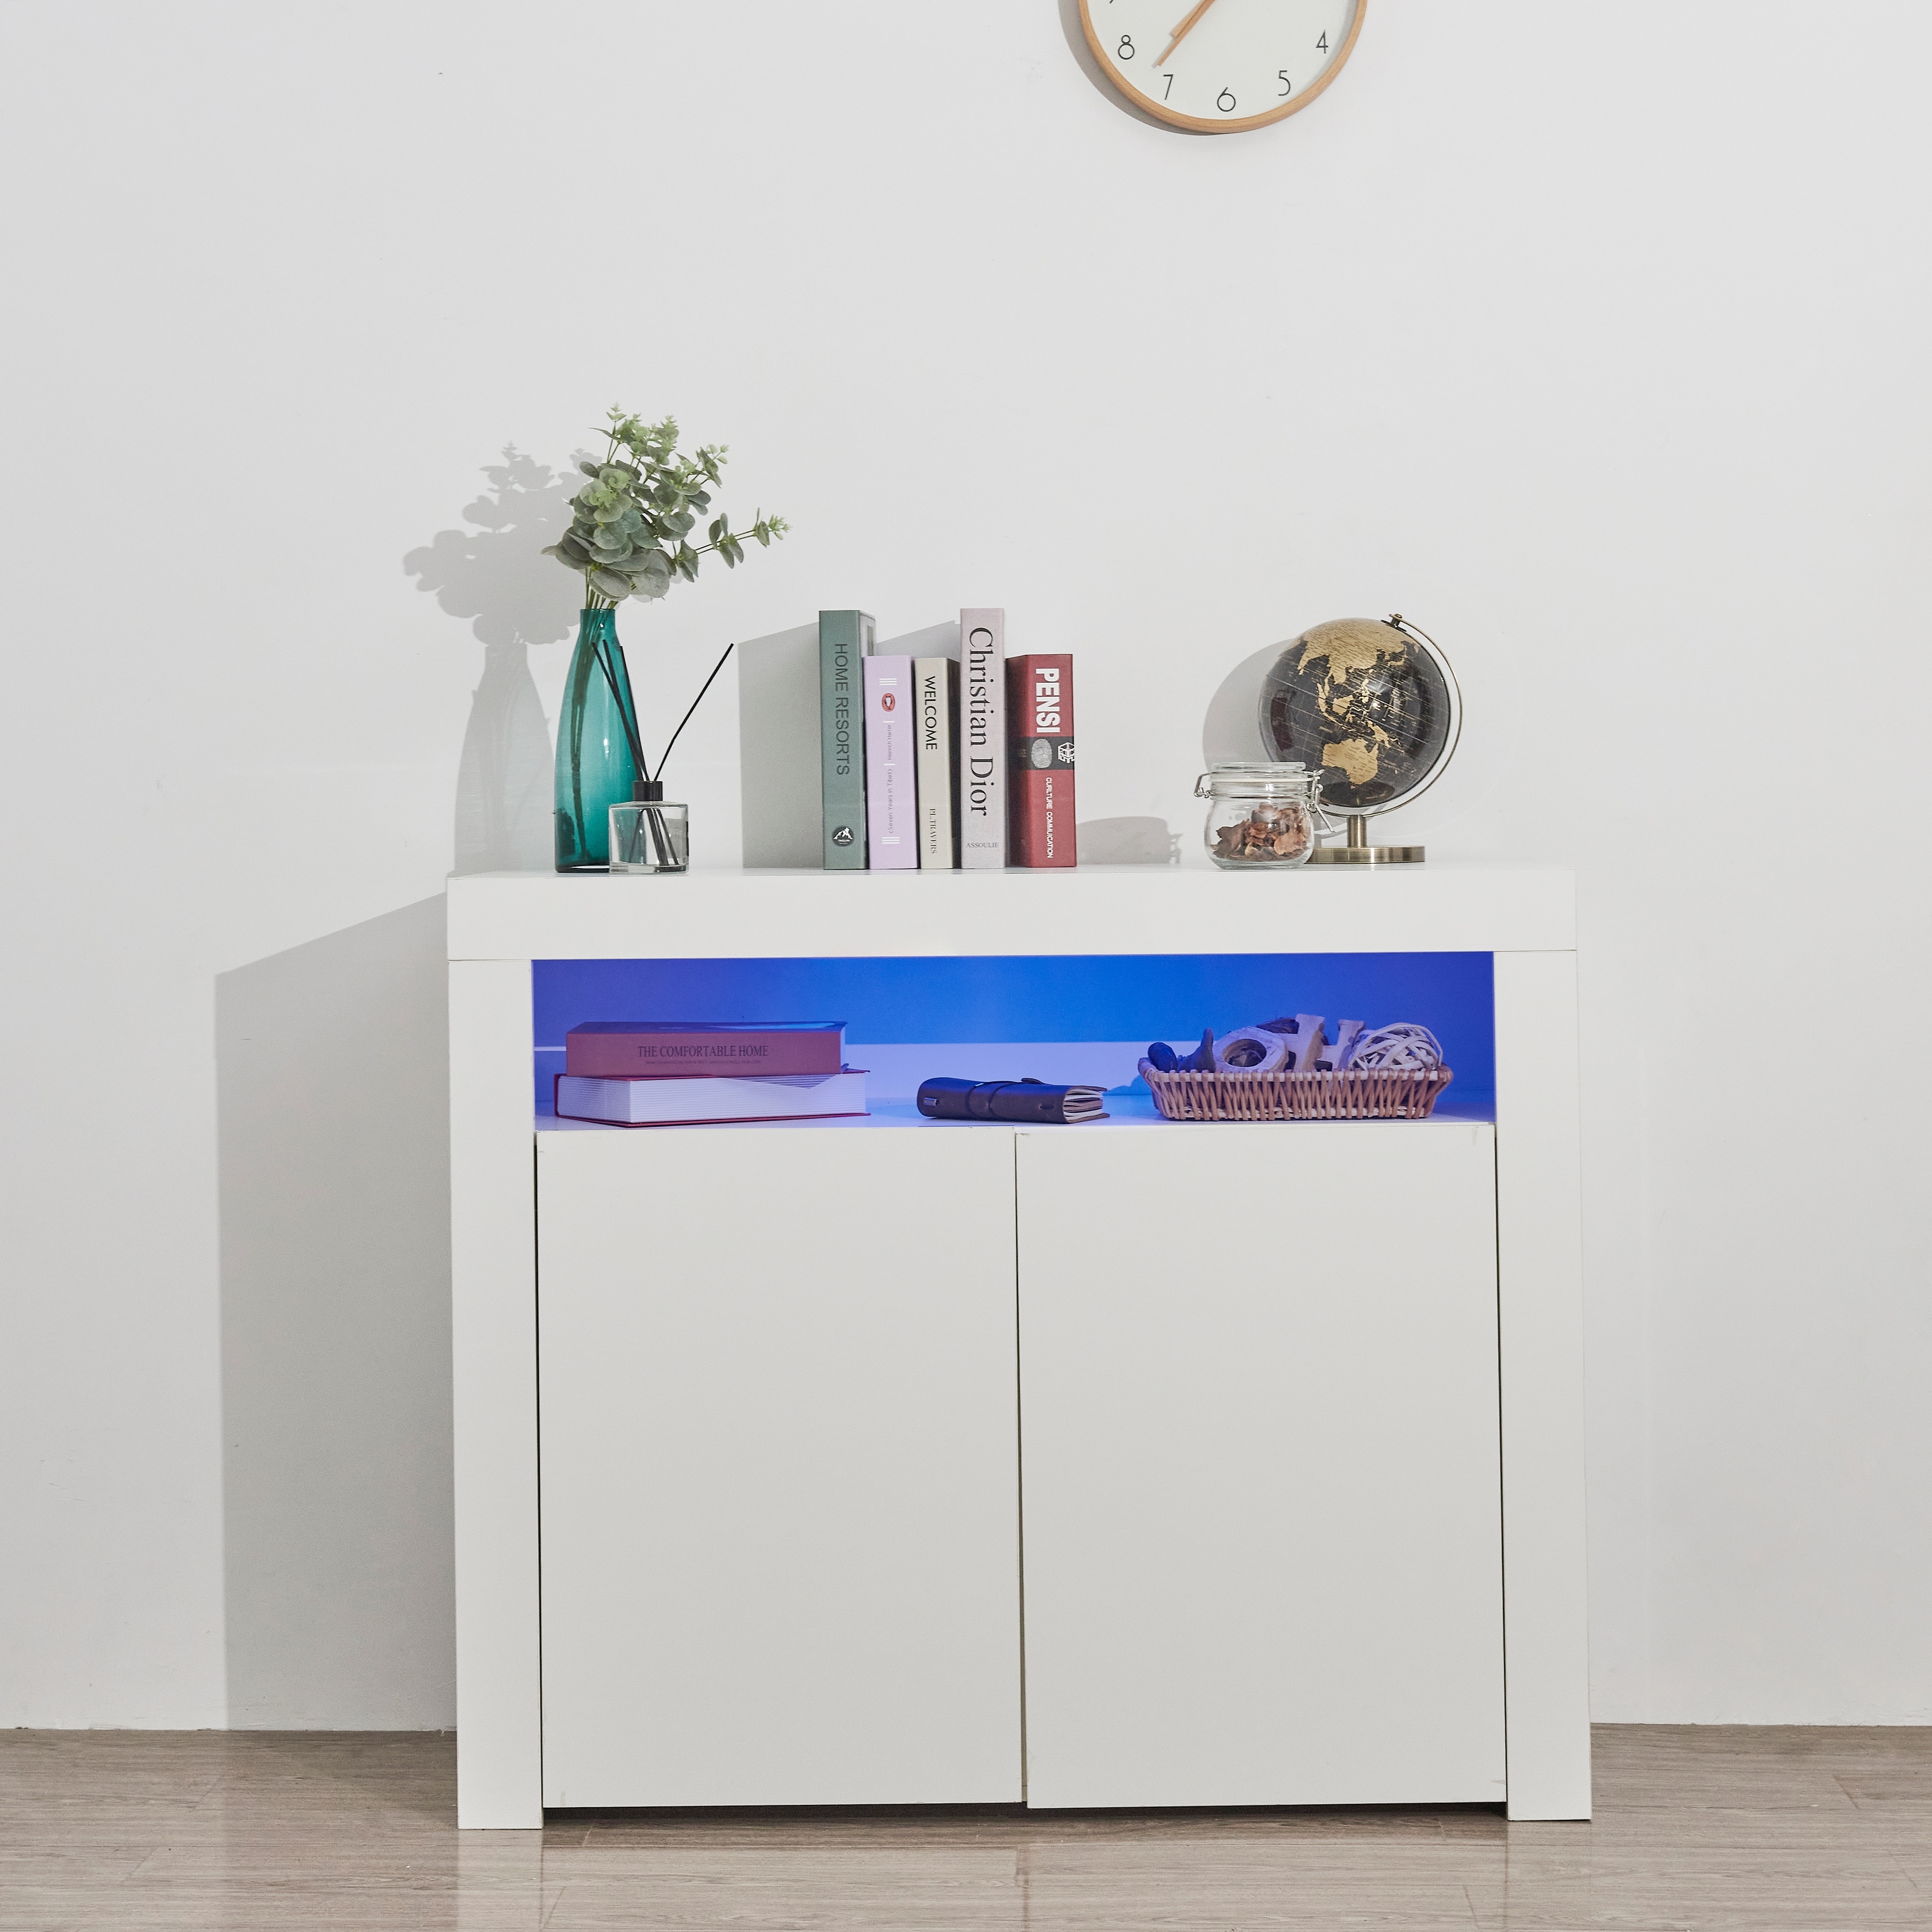 Sideboard Storage Cabinet High Gloss Tv Stands With Led Light Cupboard Buffet Wooden Storage Display Cabinet Tv Console